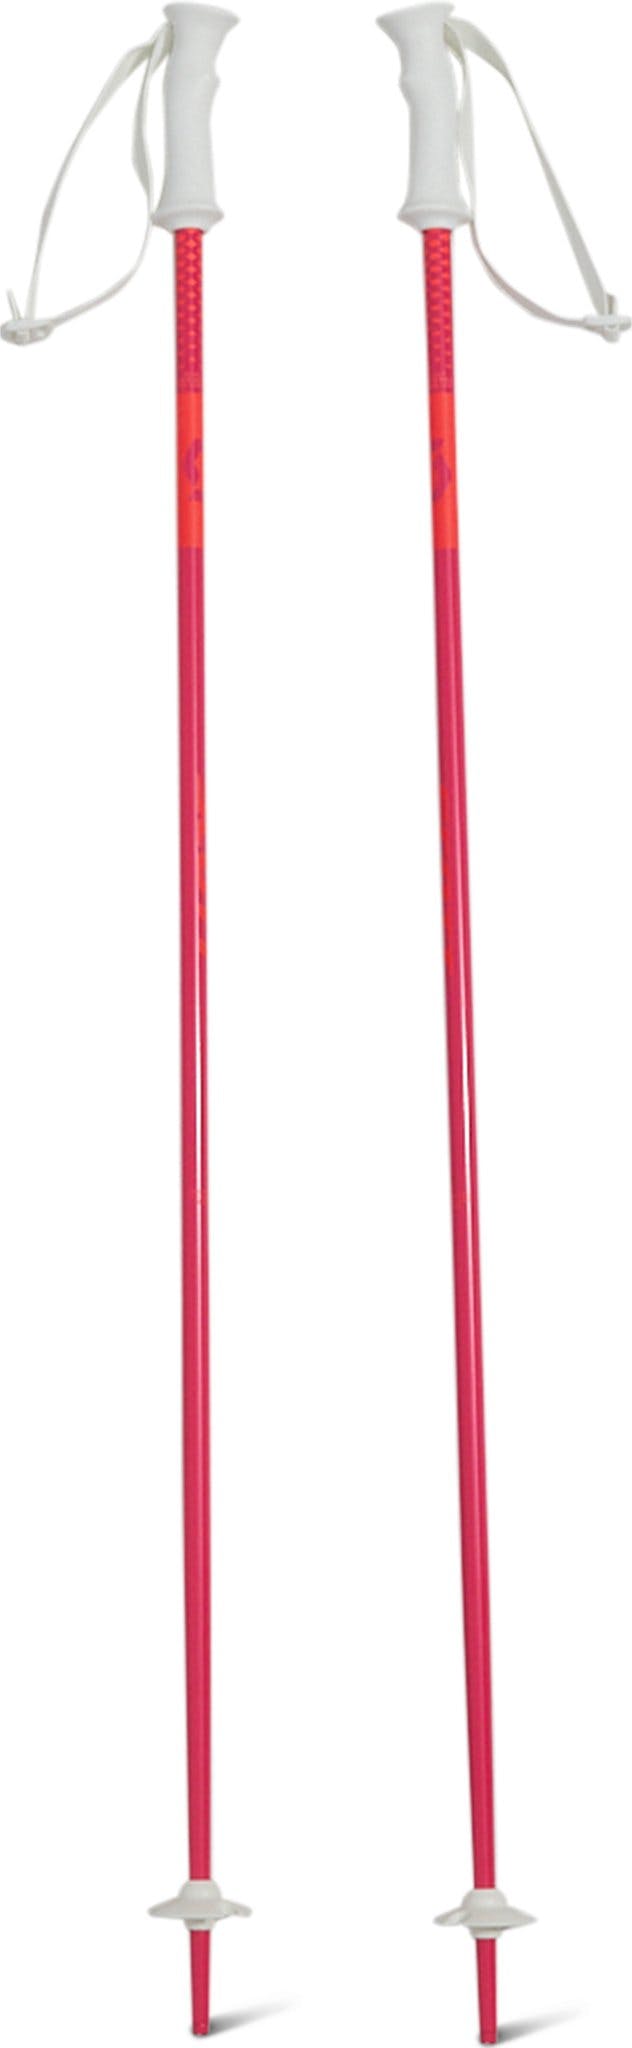 Product image for Element Poles - Junior